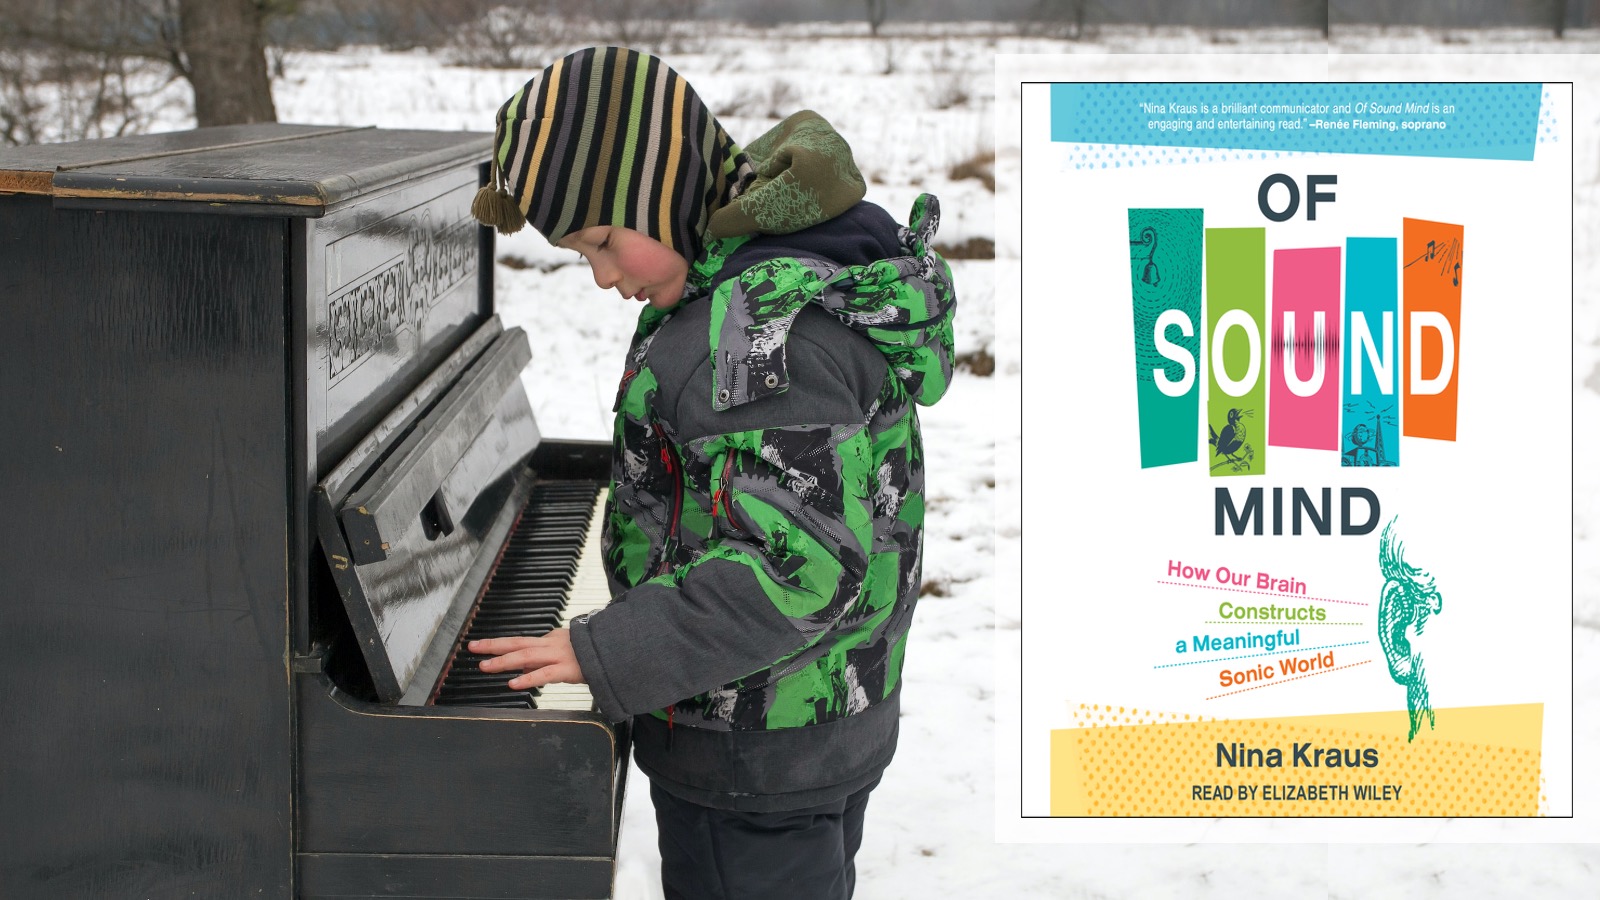 A boy dressed for winter in a cap with a tassle and parka stands outside over a black upright piano, left on a snowy field. He bends down with an expression of great concentration, his index finger touching a single note. To the side of him is a photo of a book, with the title, "Of Sound Mind: How Our Brain Constructs a Meaningful Sonic World."